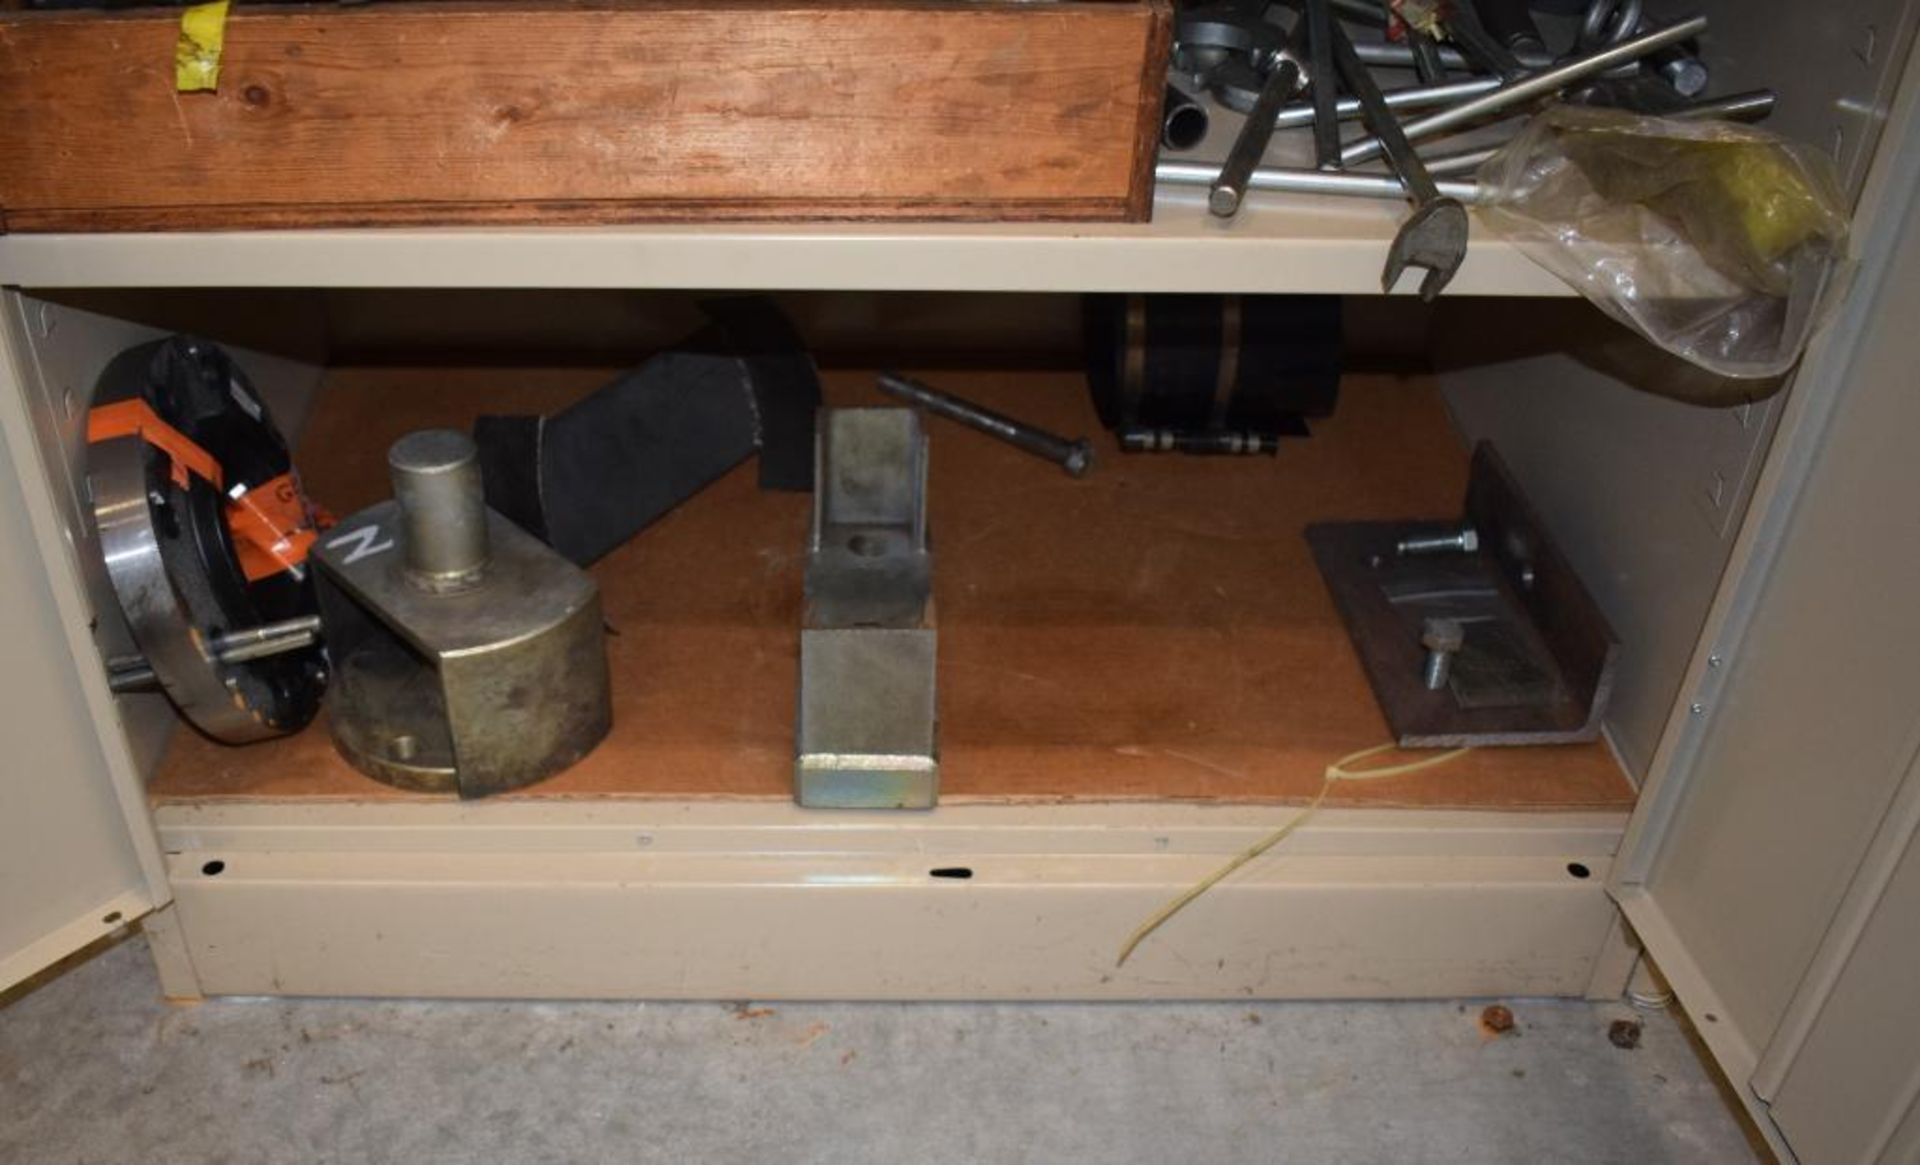 Lot Consisting Of: (2) 2 Door metal cabinets with miscellaneous tools and hardware supplies, includi - Image 7 of 9